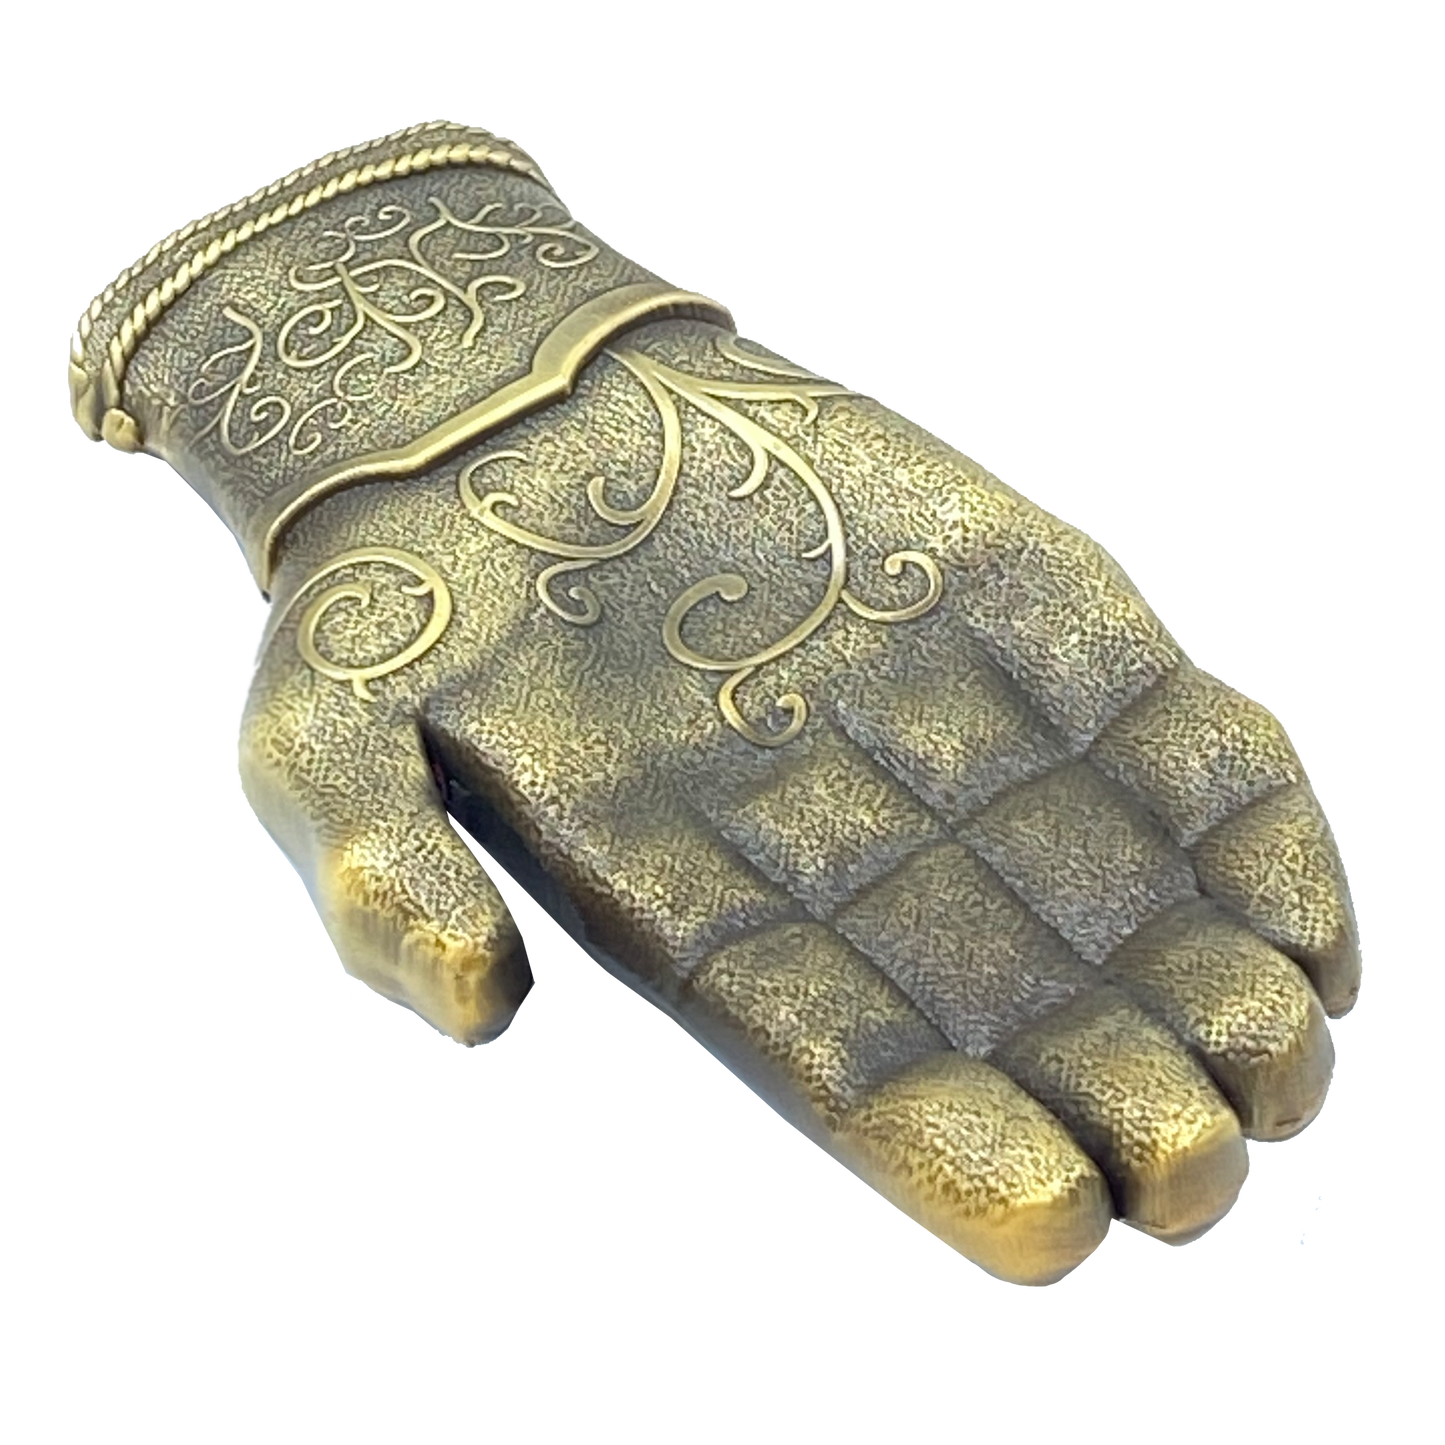 AA-016 Kingslayer Game of Thrones inspired GoT Jamie Lannister gold hand glove challenge coin